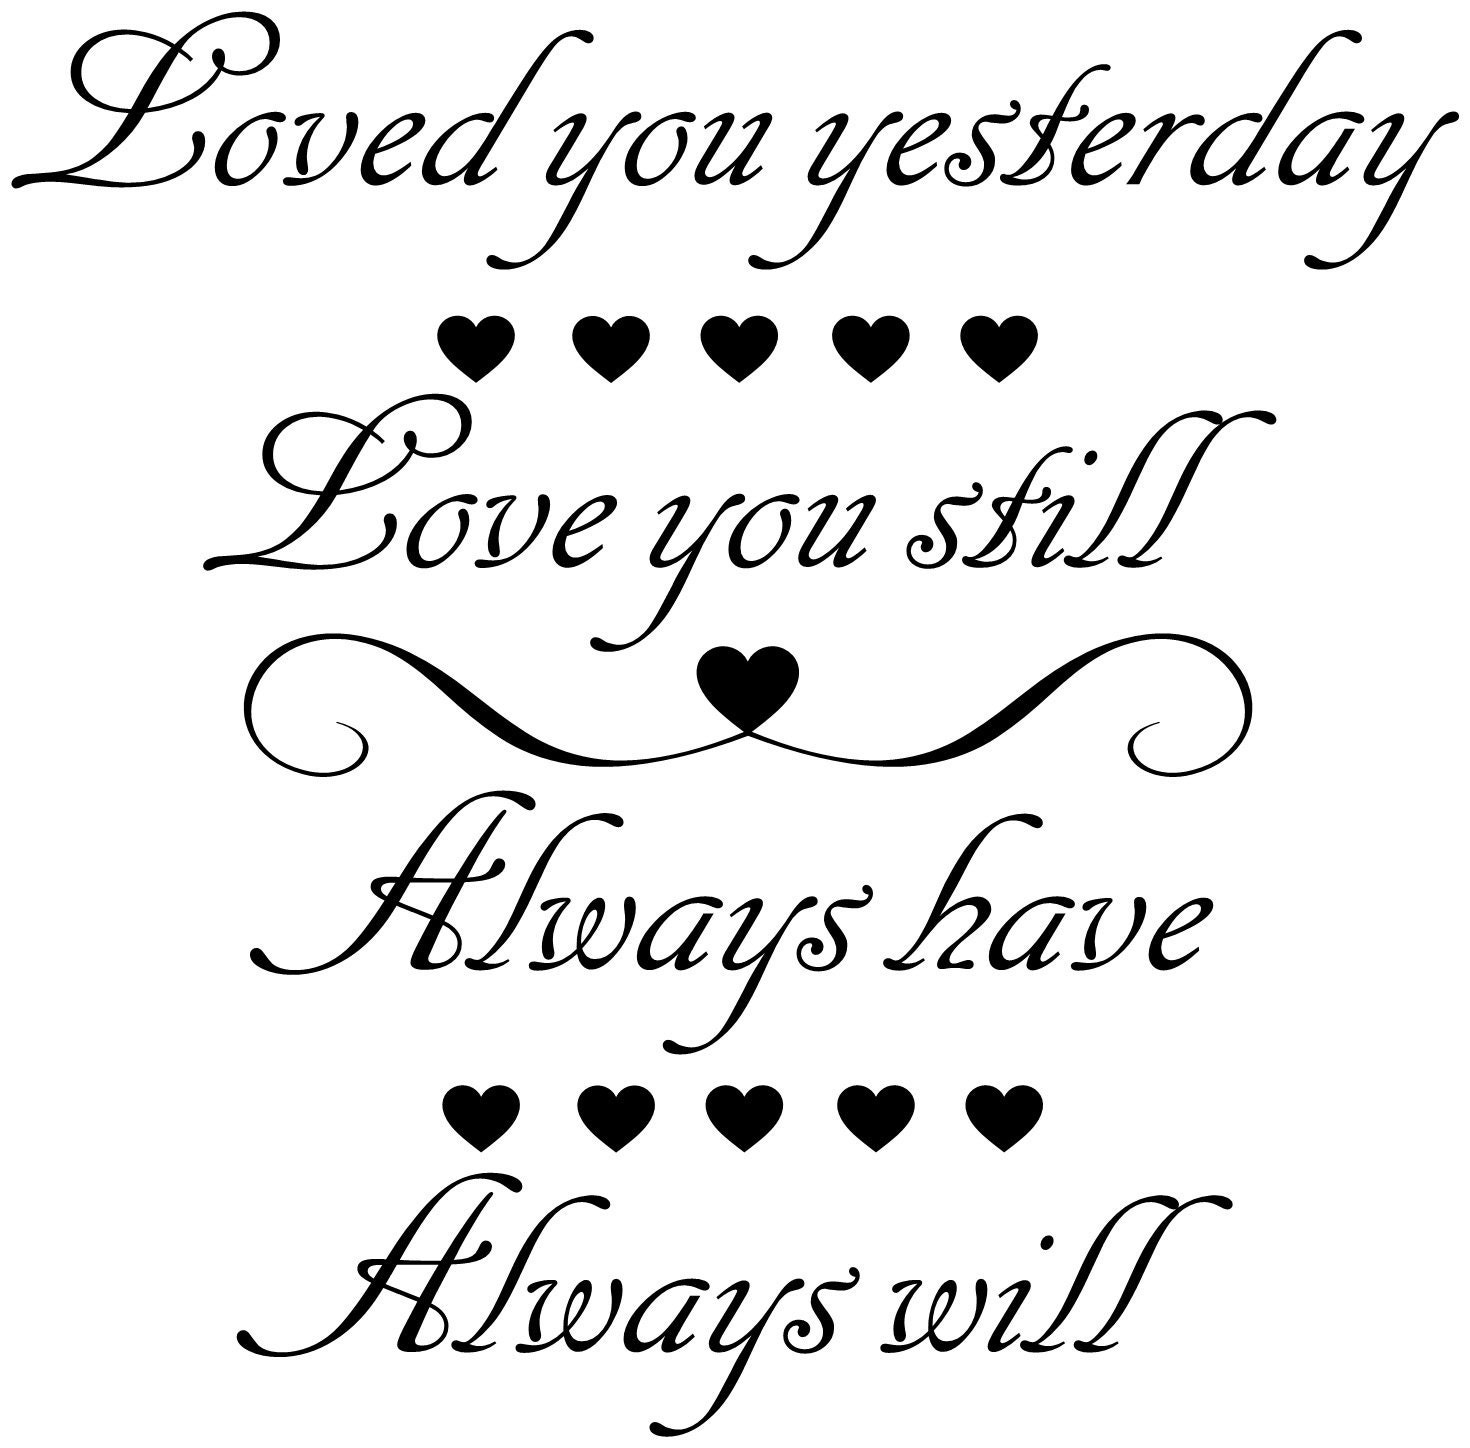 Download Loved you yesterday love you still always have always will